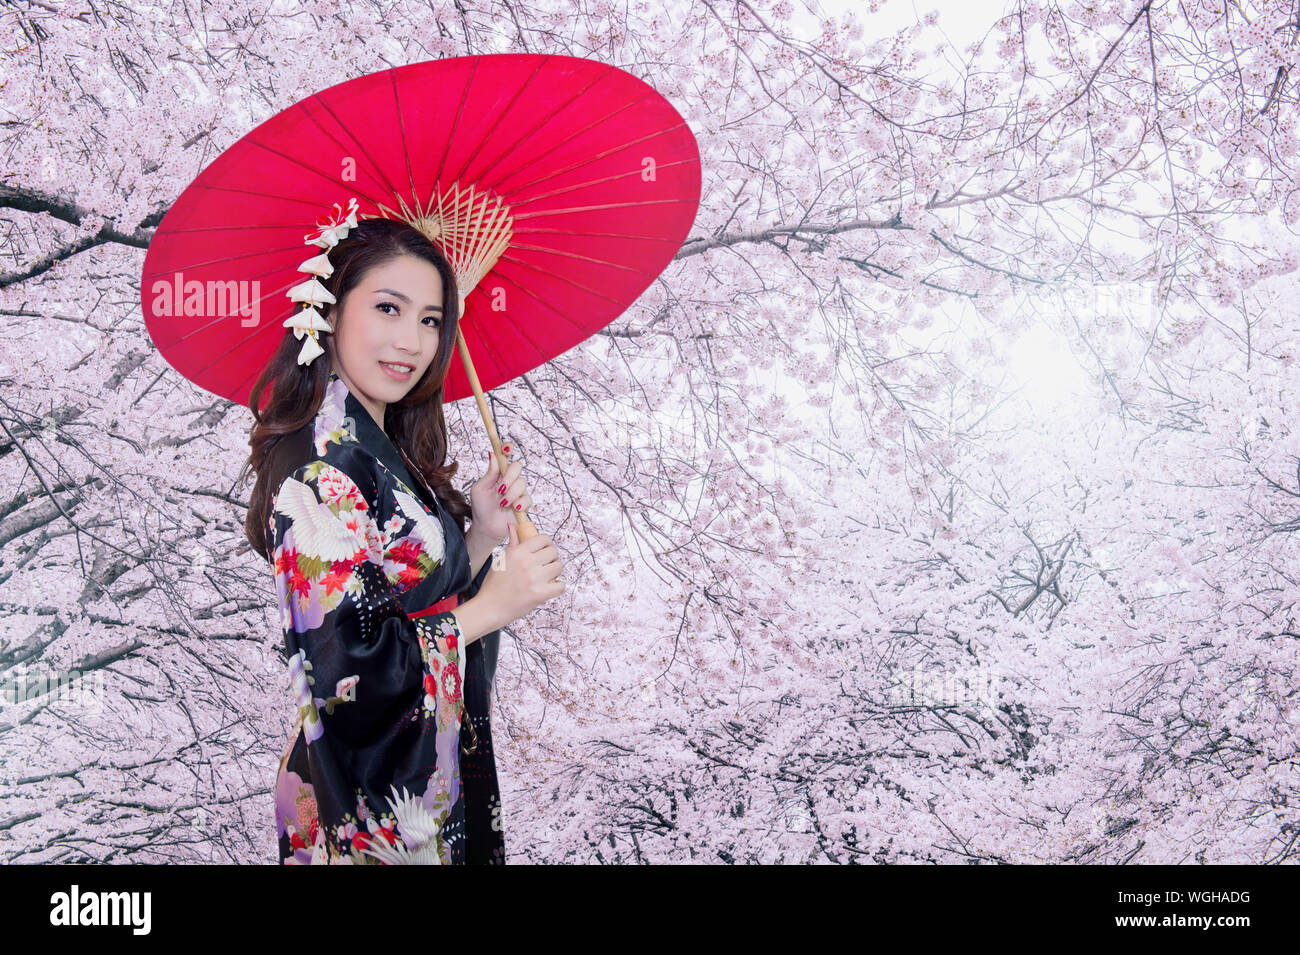 Portrait Of Woman In Kimono Holding Red Umbrella Against Pink Cherry Blossoms Stock Photo